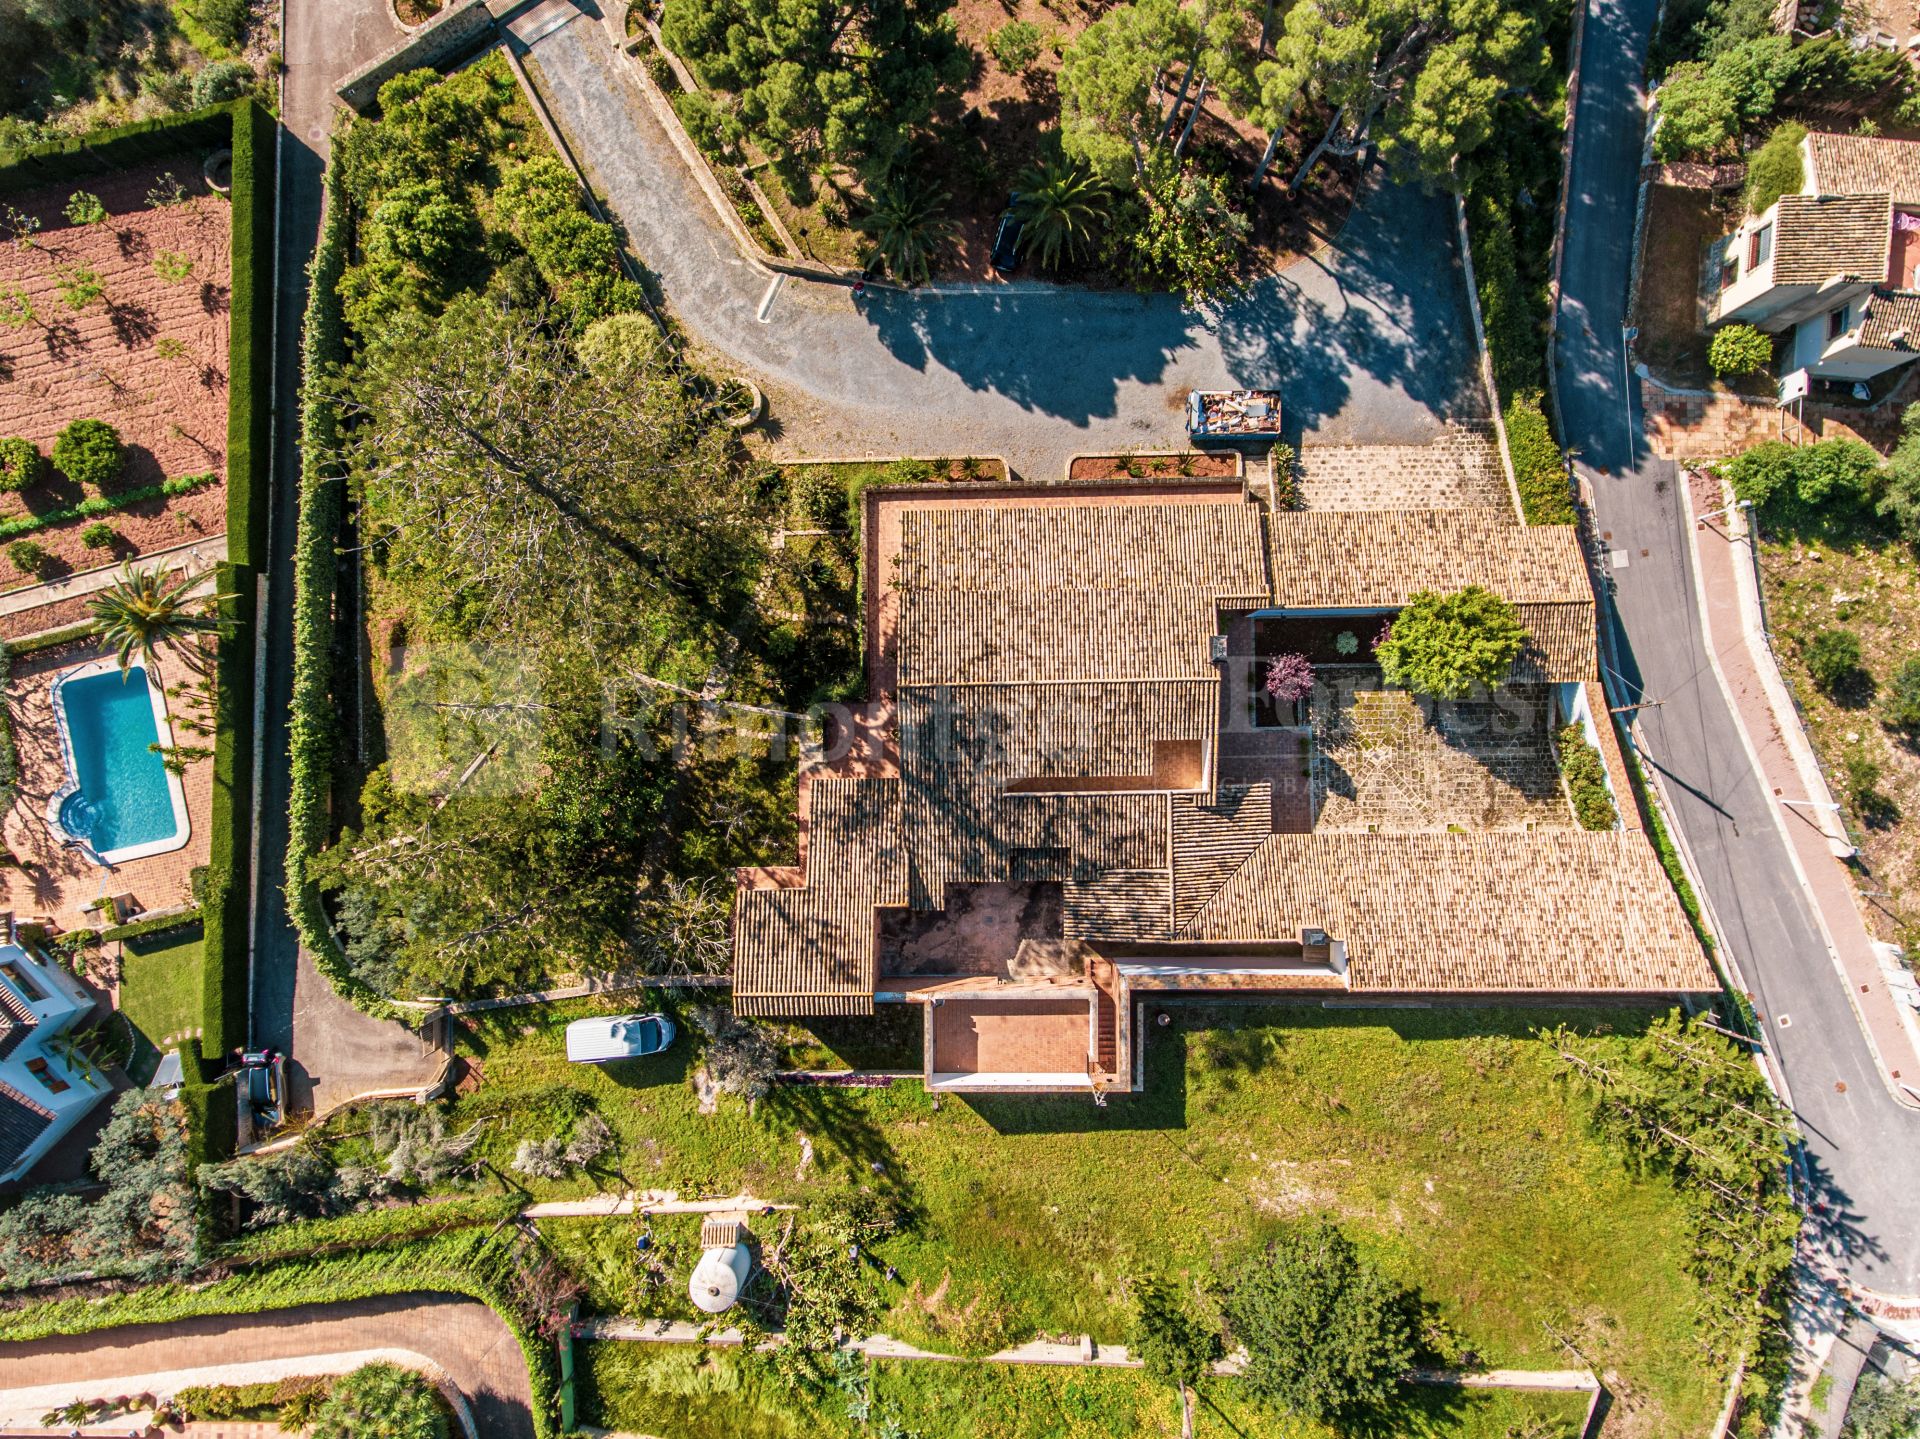 Traditional Finca with exceptional location in Mezquides, Javea, Alacant